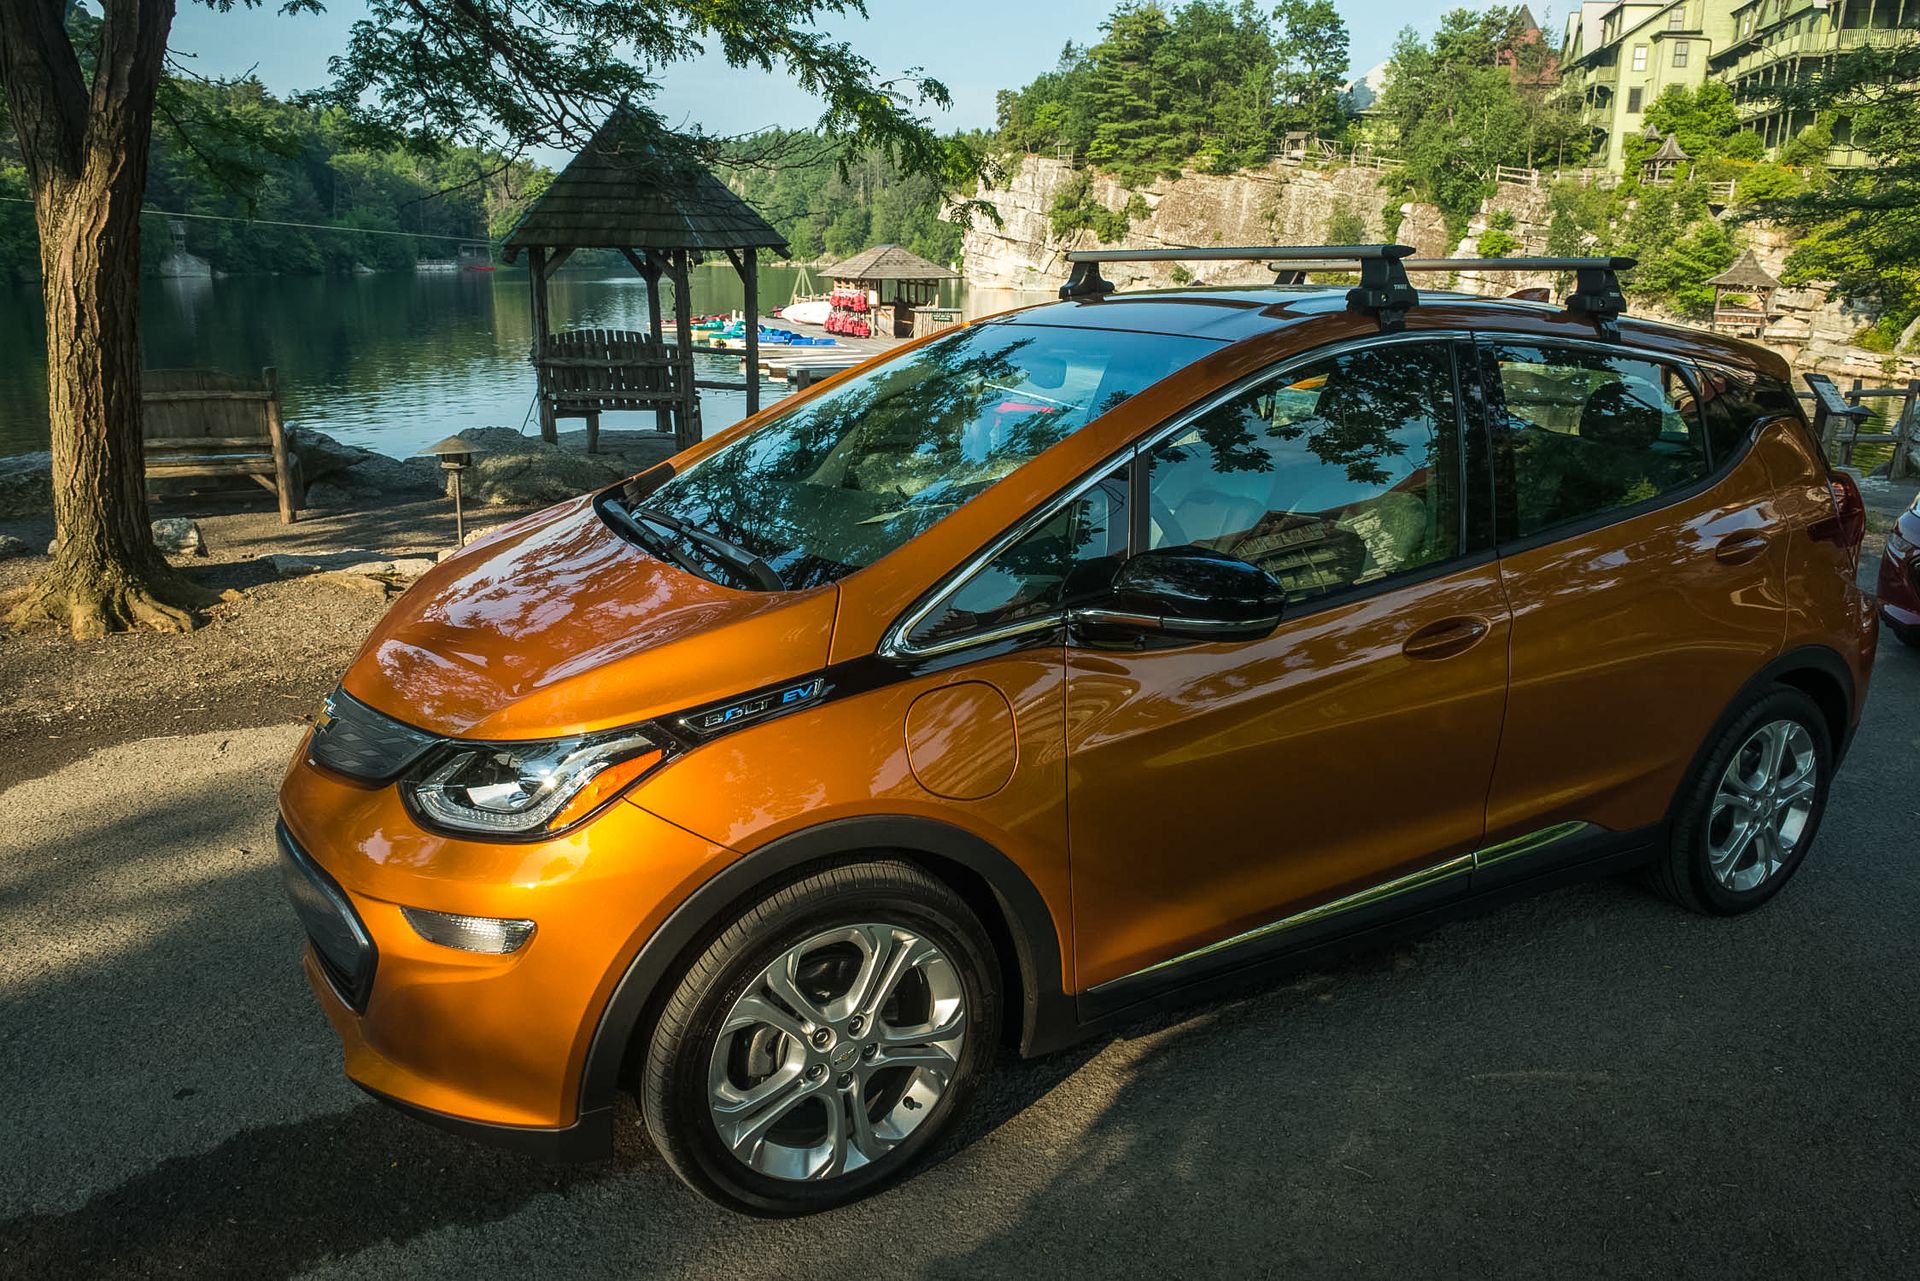 Chevy Bolt Is Chevrolet's Most Reliable Vehicle